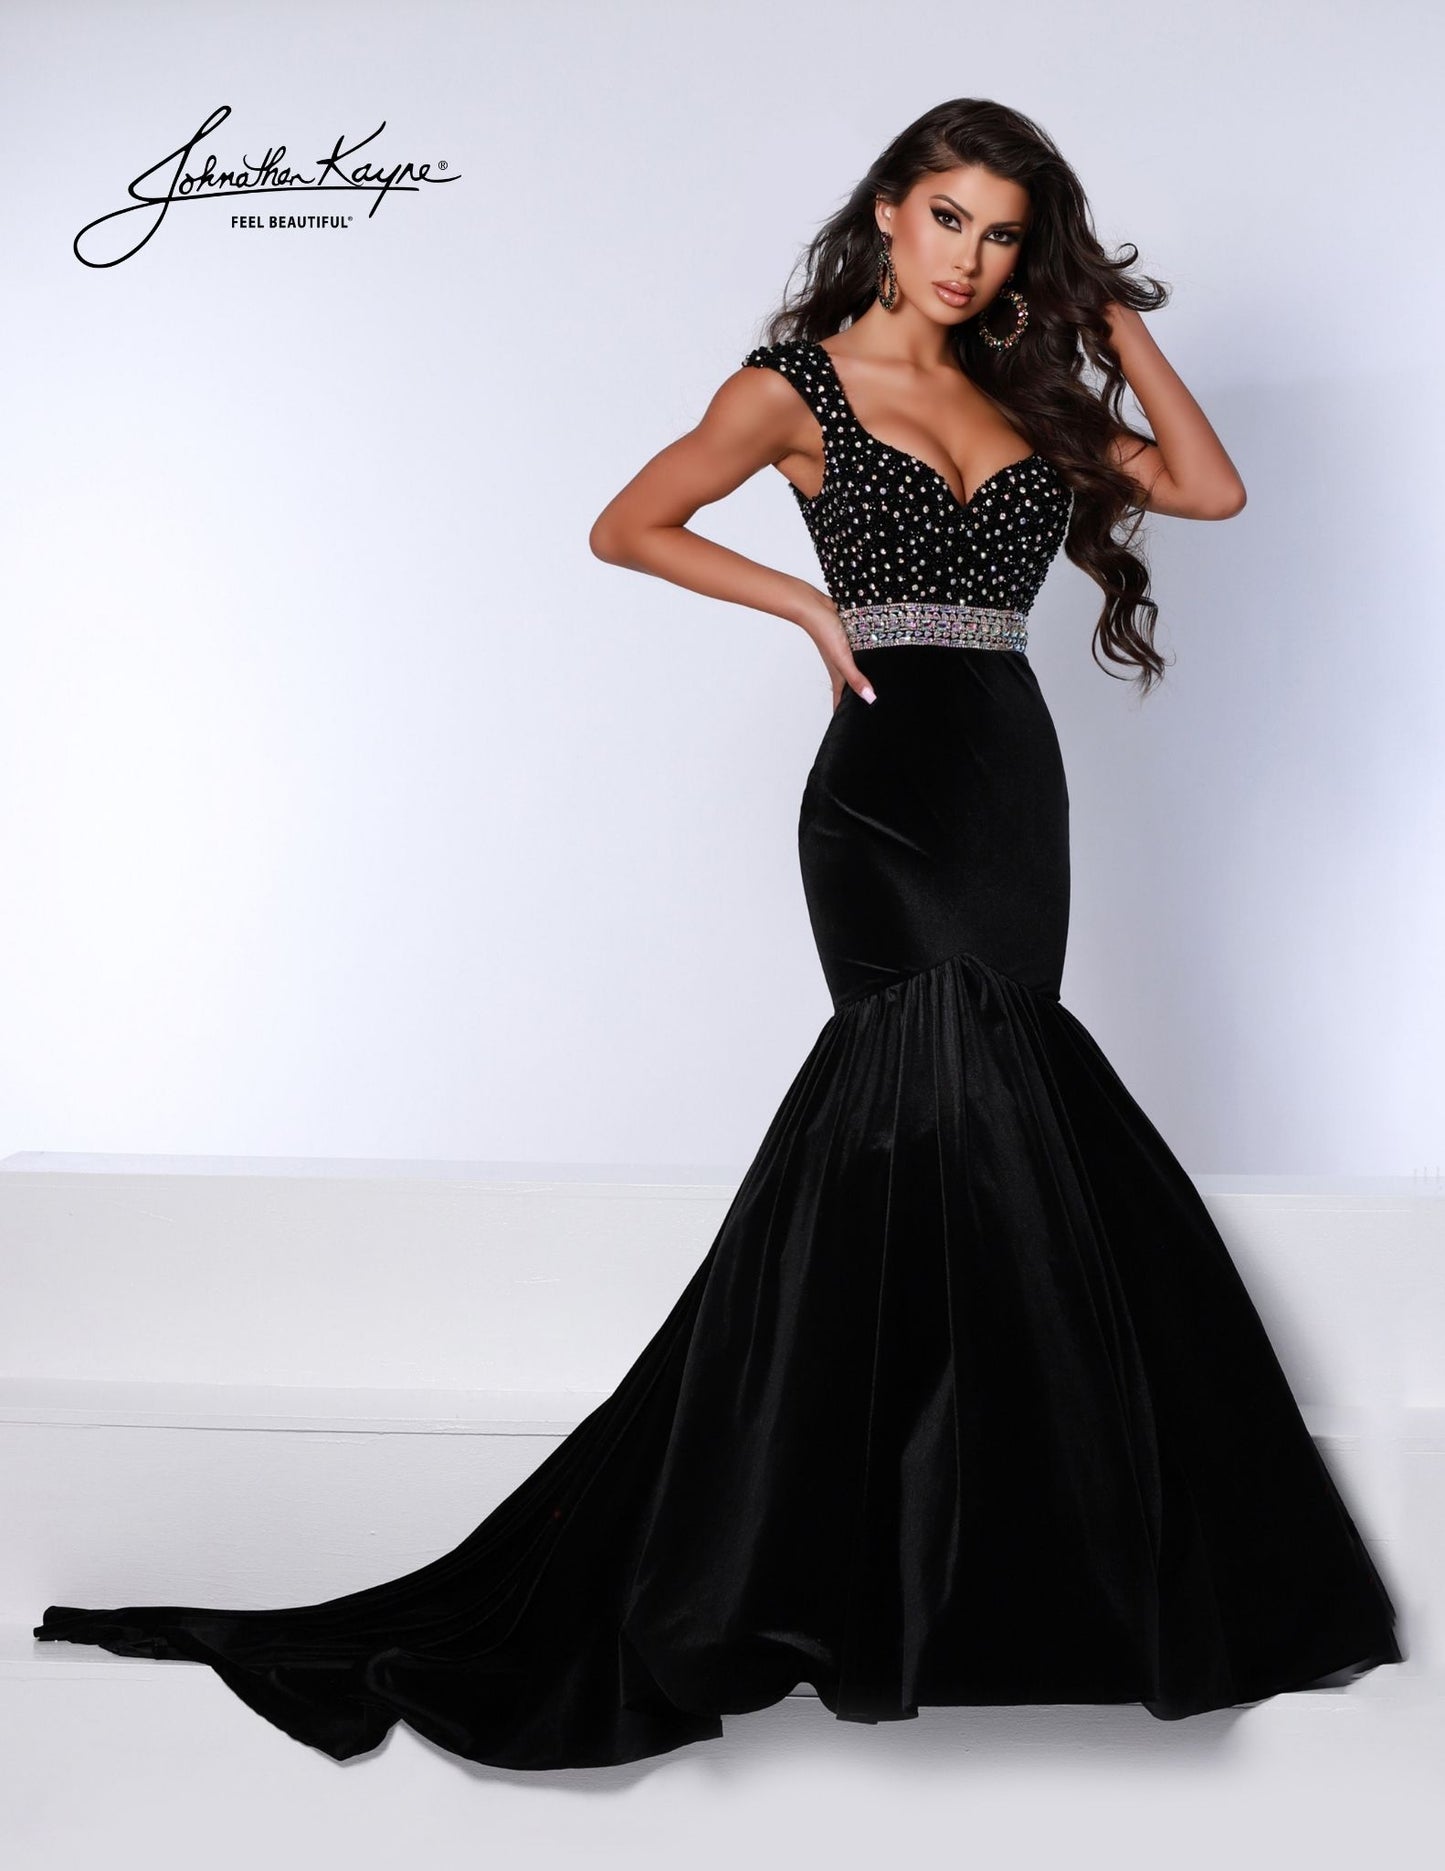 Introducing the Johnathan Kayne 2724 dress; a stunning evening gown featuring a fitted velvet bodice and mermaid skirt. Luxuriously crafted with a hot stone embellishment, it is sure to turn heads at any special event. The look is finished with an eye-catching crystal belt for a show-stopping finish.  Sizes: 00,0,2,4,6,8,10,12,14,16  Colors: Black, Red, White, Royal 